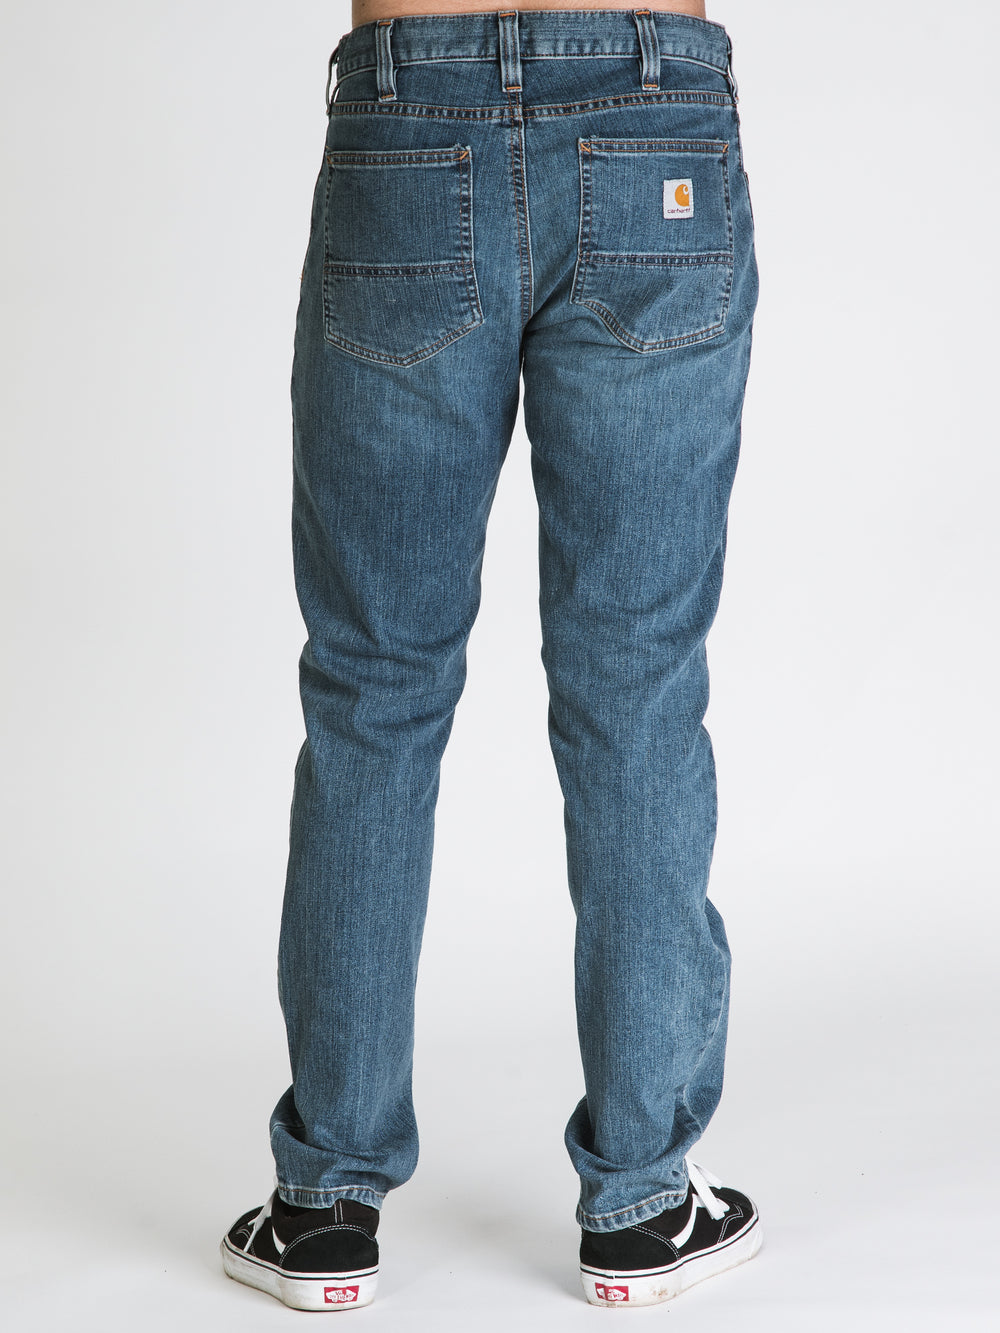 CARHARTT RELAXED FIT 5 POCKET JEAN - CLEARANCE